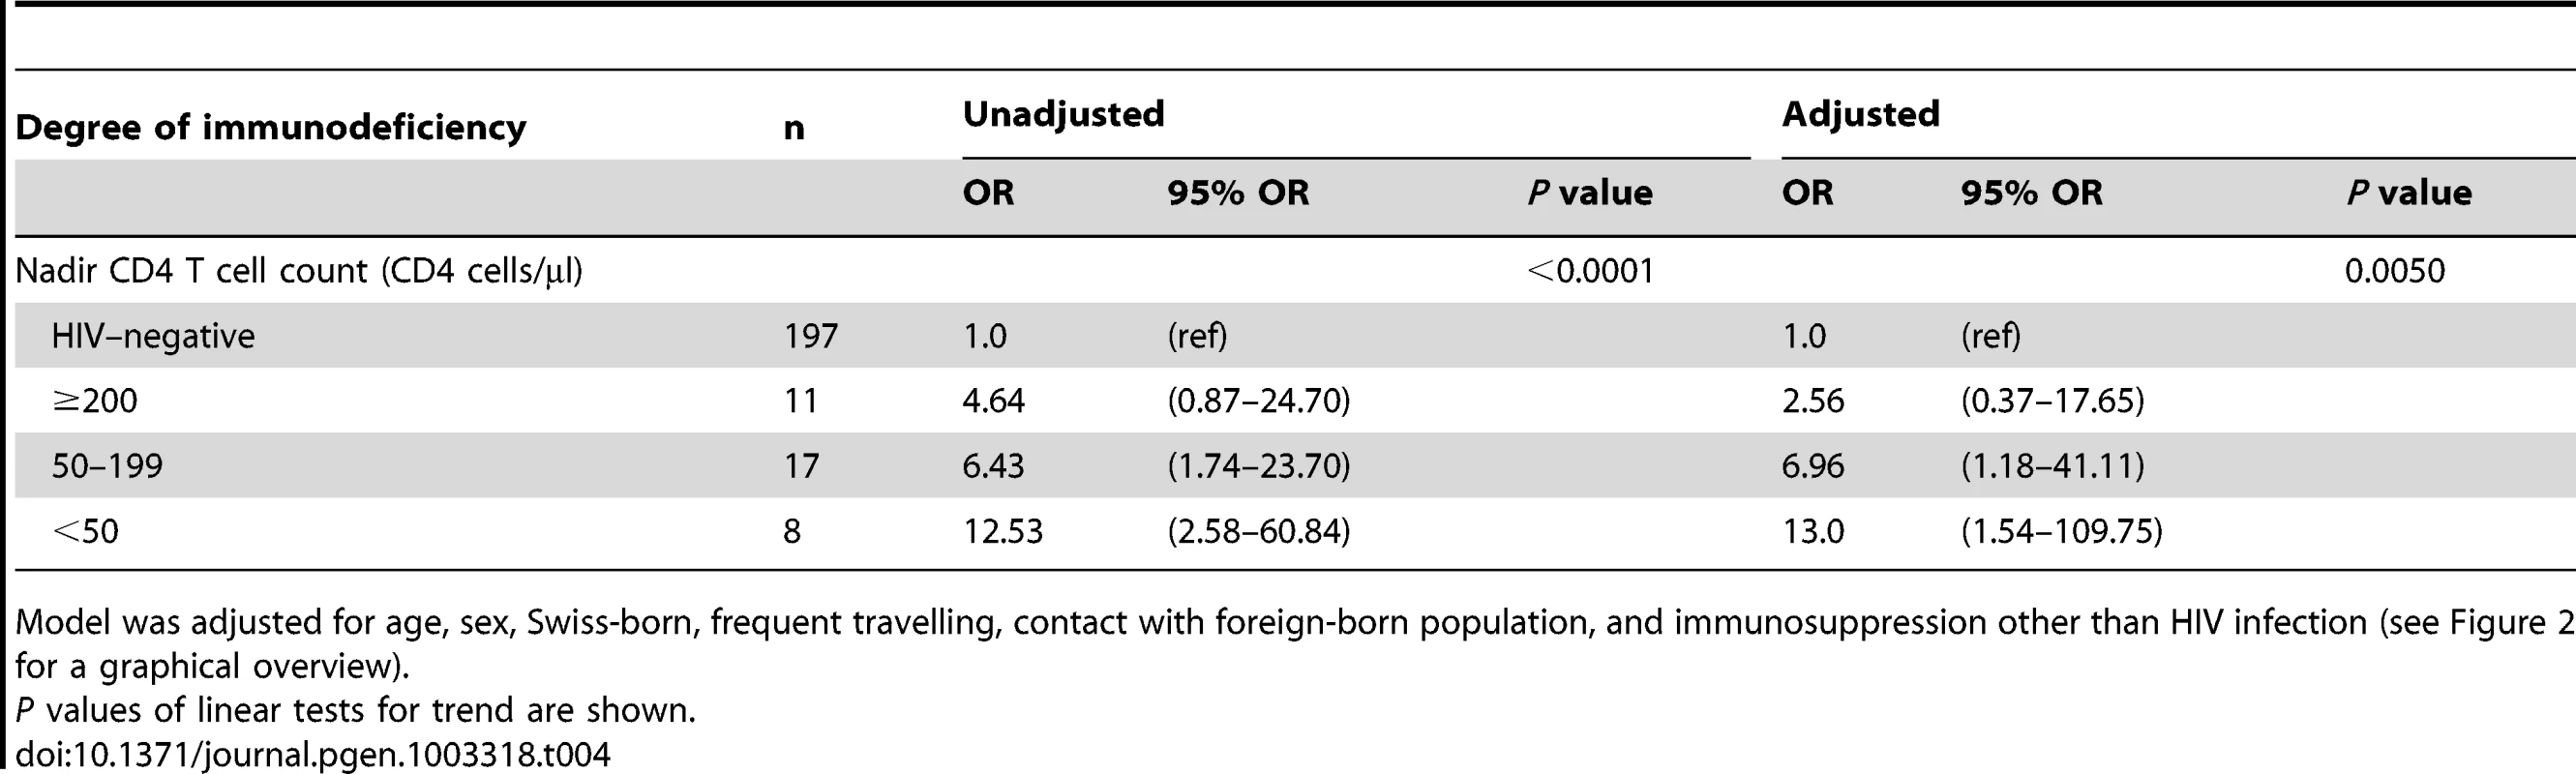 Association between the degree of immunodeficiency and tuberculosis with an allopatric <i>Mycobacterium tuberculosis</i> strain among European patients (n = 233).